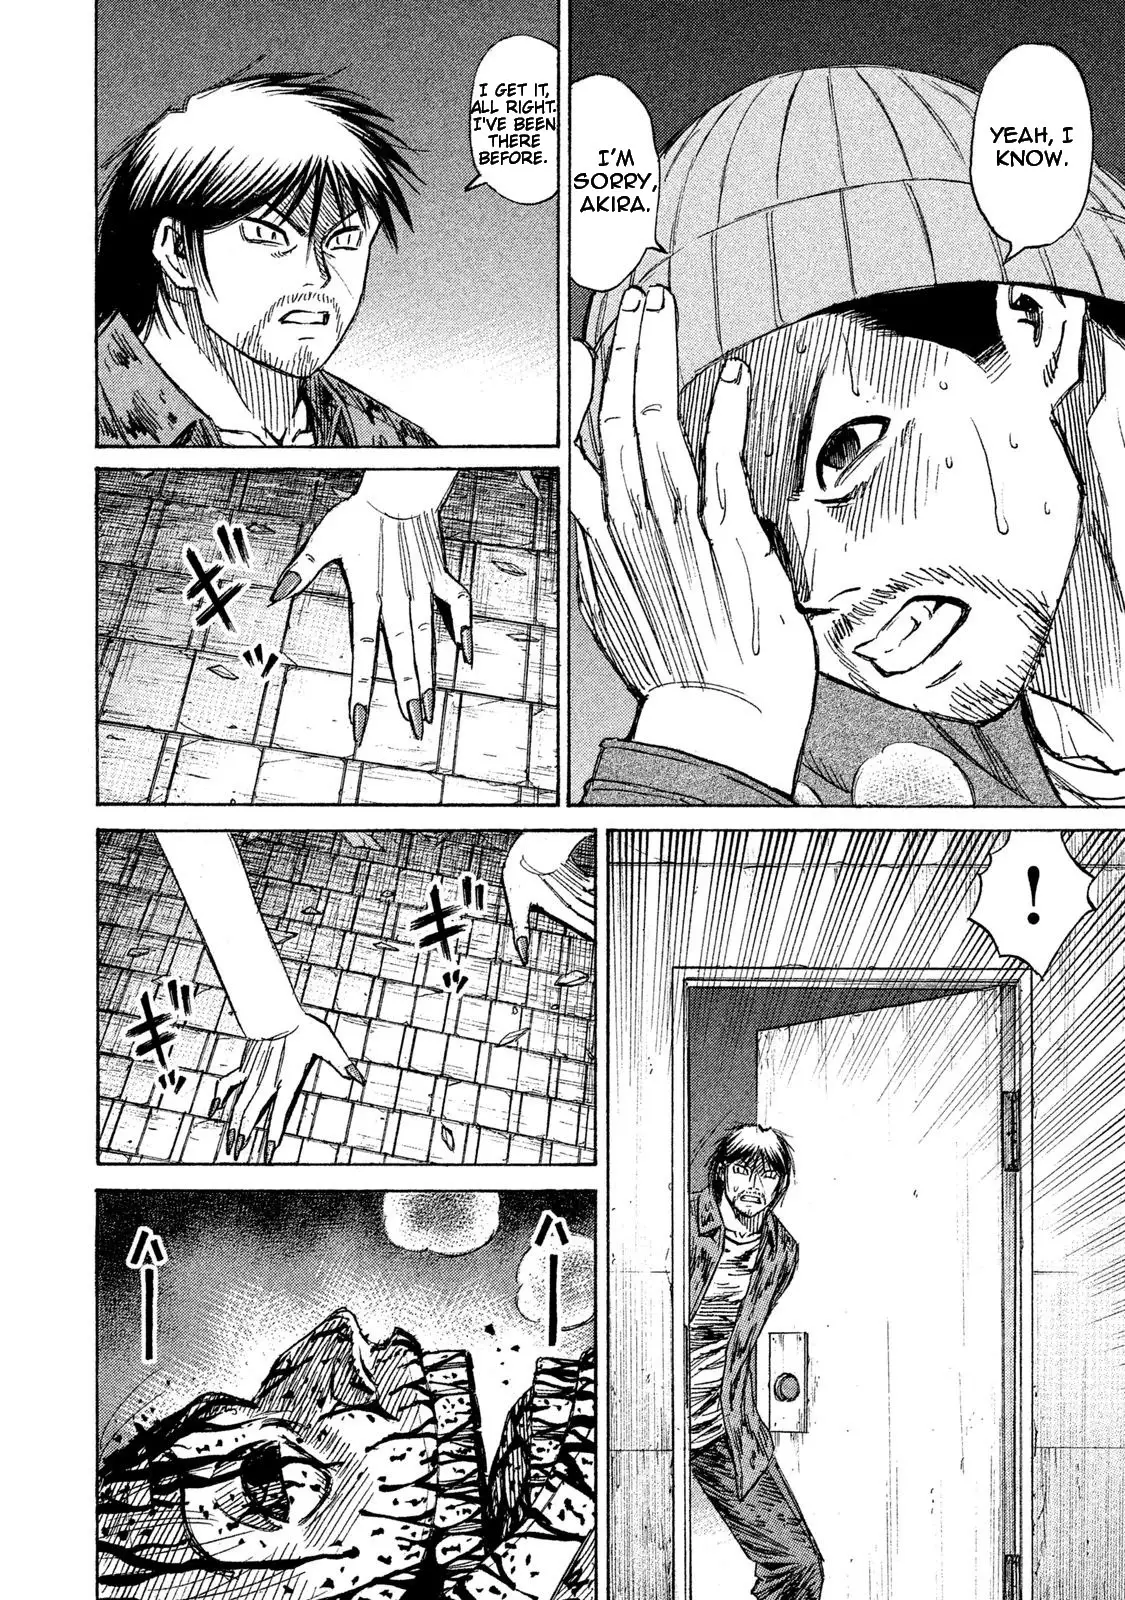 Higanjima - 48 Days Later - 16 page 15-962384d3